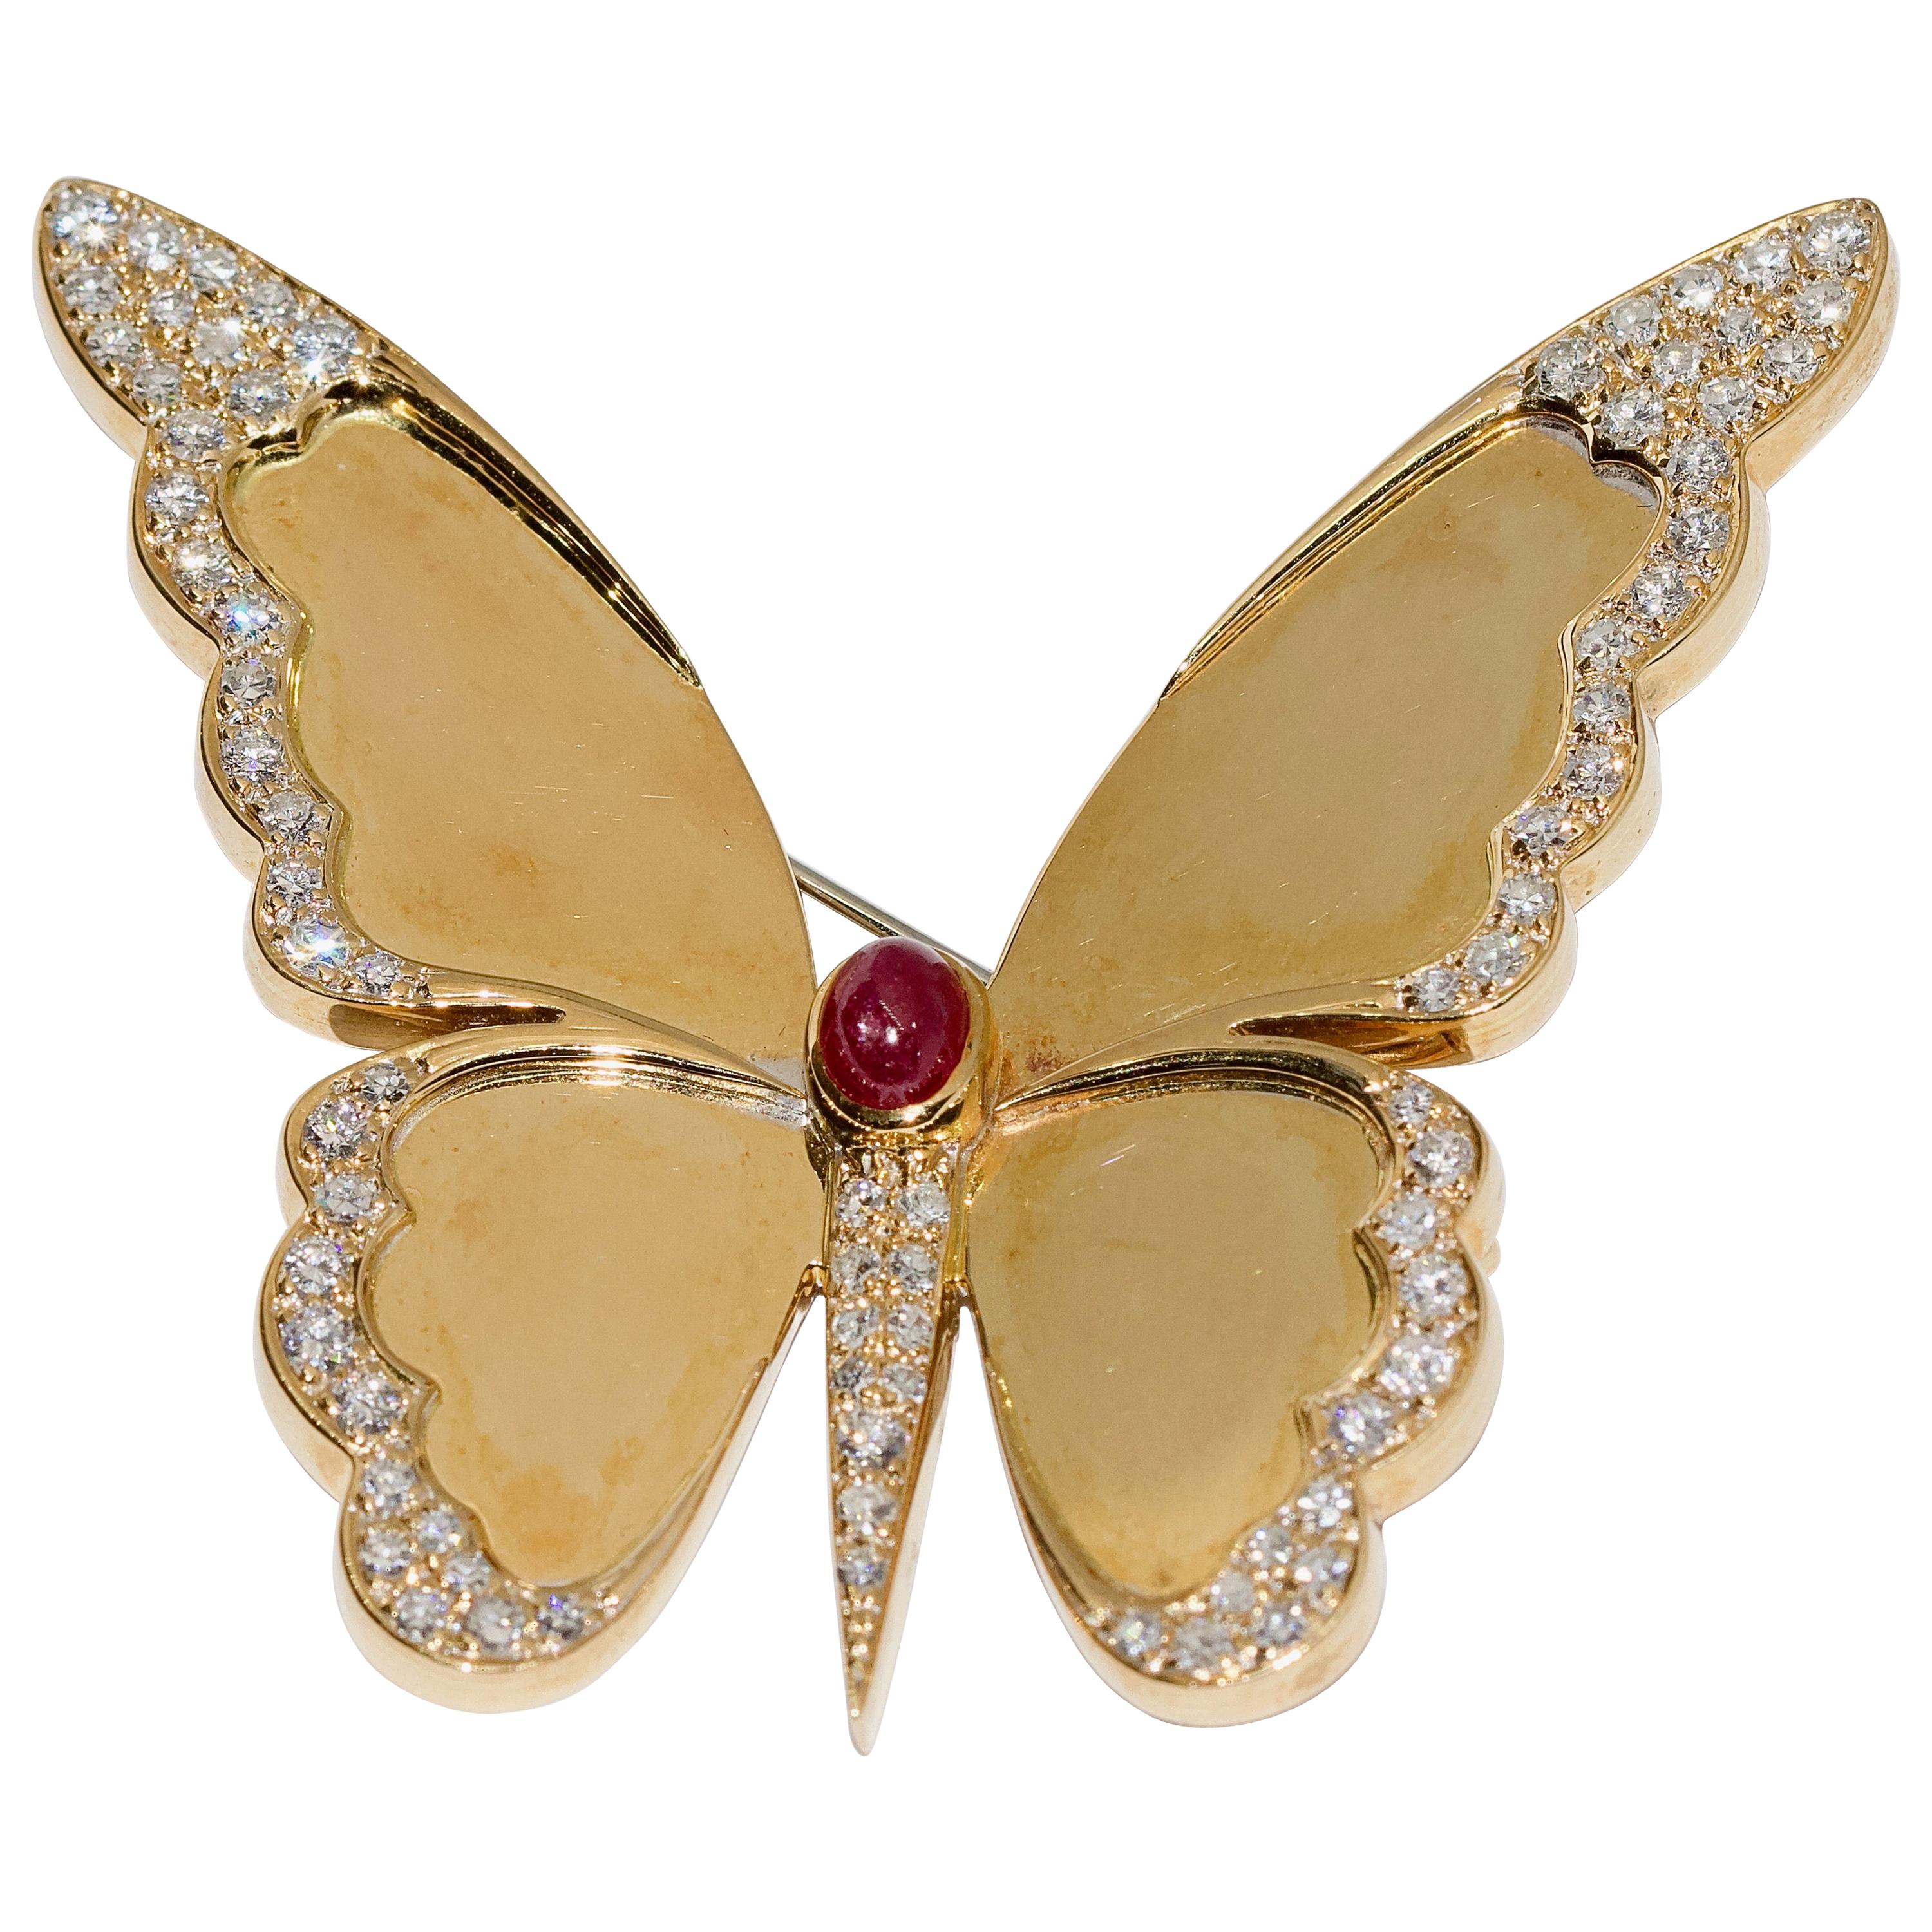 Large Ladies Butterfly Brooch, 18 Karat Gold with Diamonds and Ruby